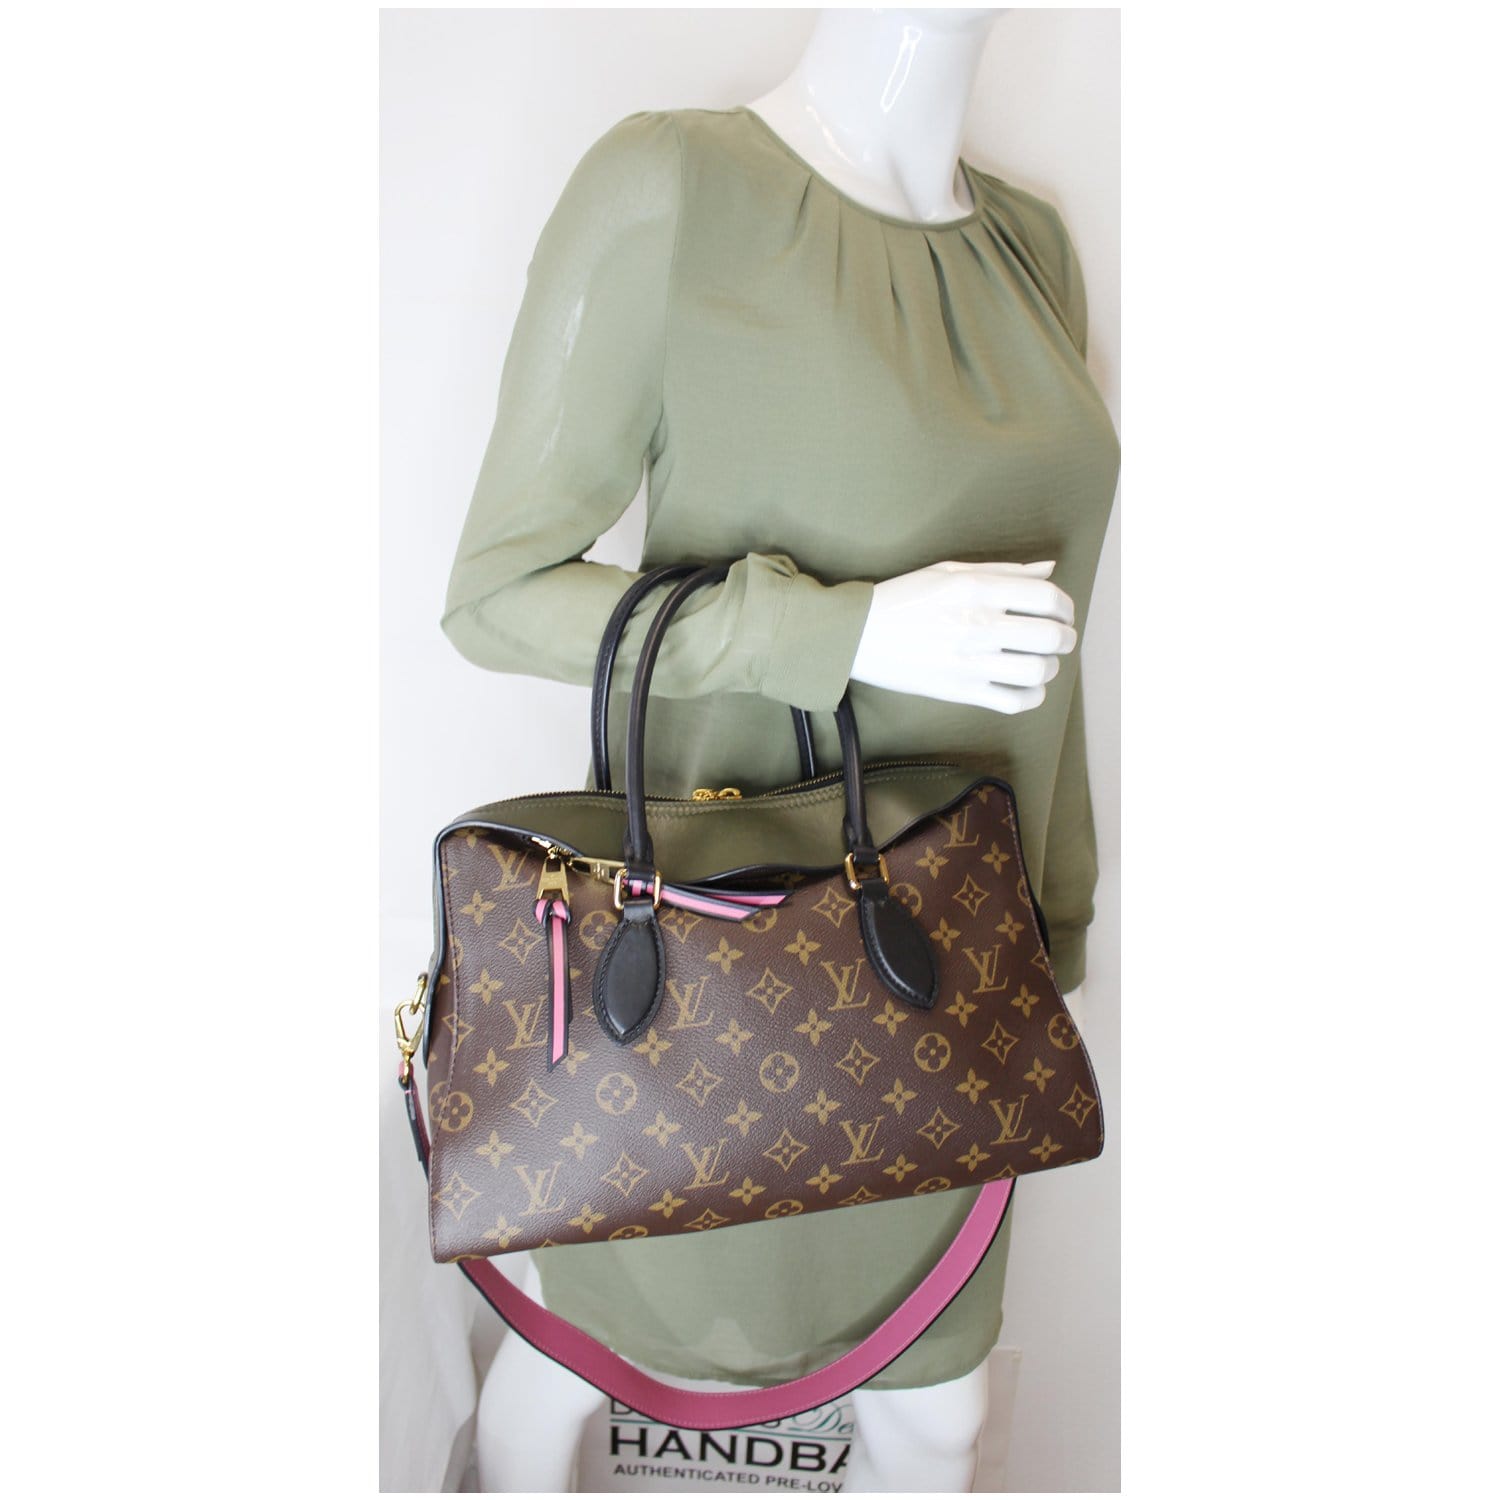 Louis Vuitton - Authenticated Favorite Handbag - Cloth Brown for Women, Very Good Condition